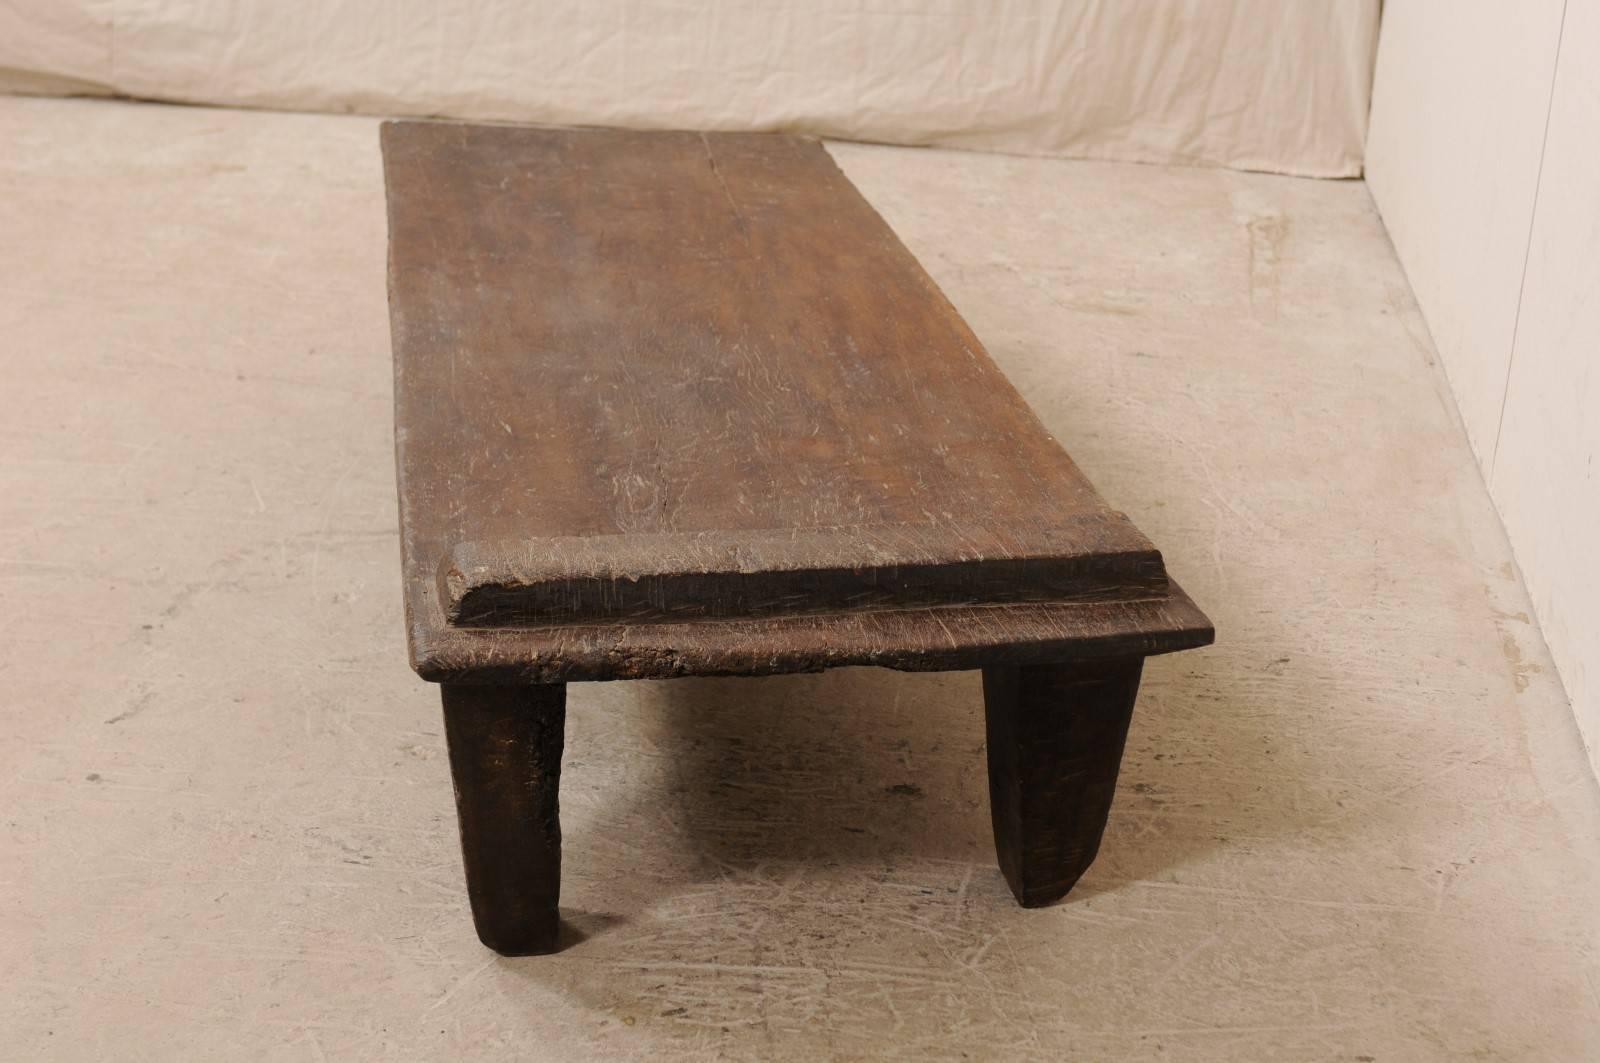 Indian Primitive Rustic Naga Wood Coffee Table from the Early 20th Century, India